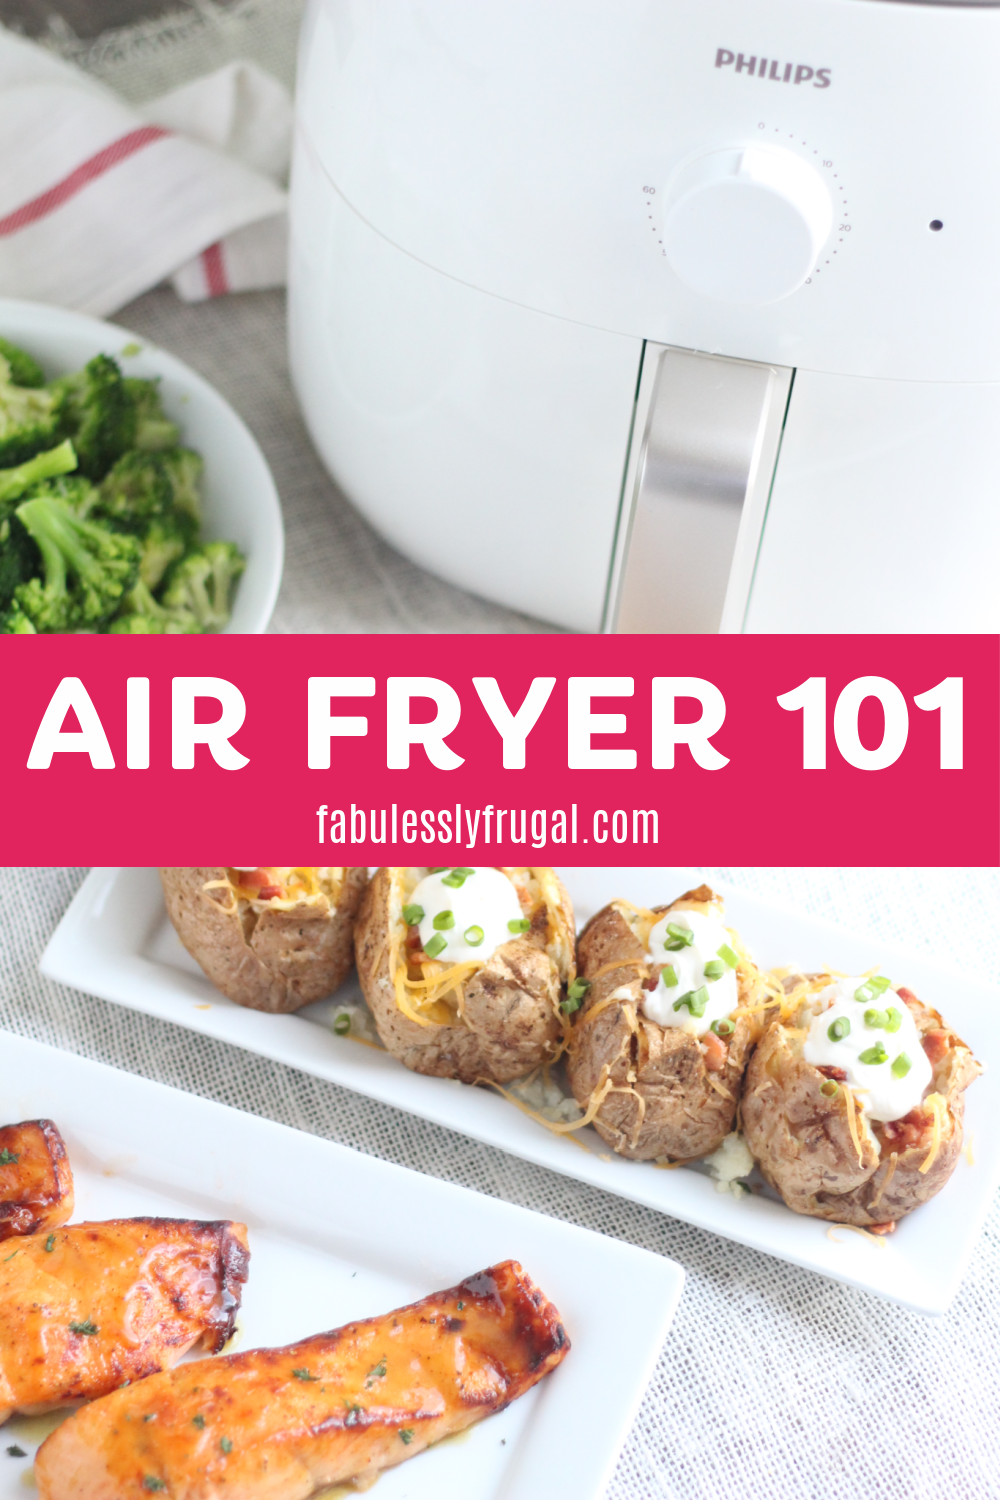 https://fabulesslyfrugal.com/wp-content/uploads/2020/11/how-do-I-use-my-air-fryer.png